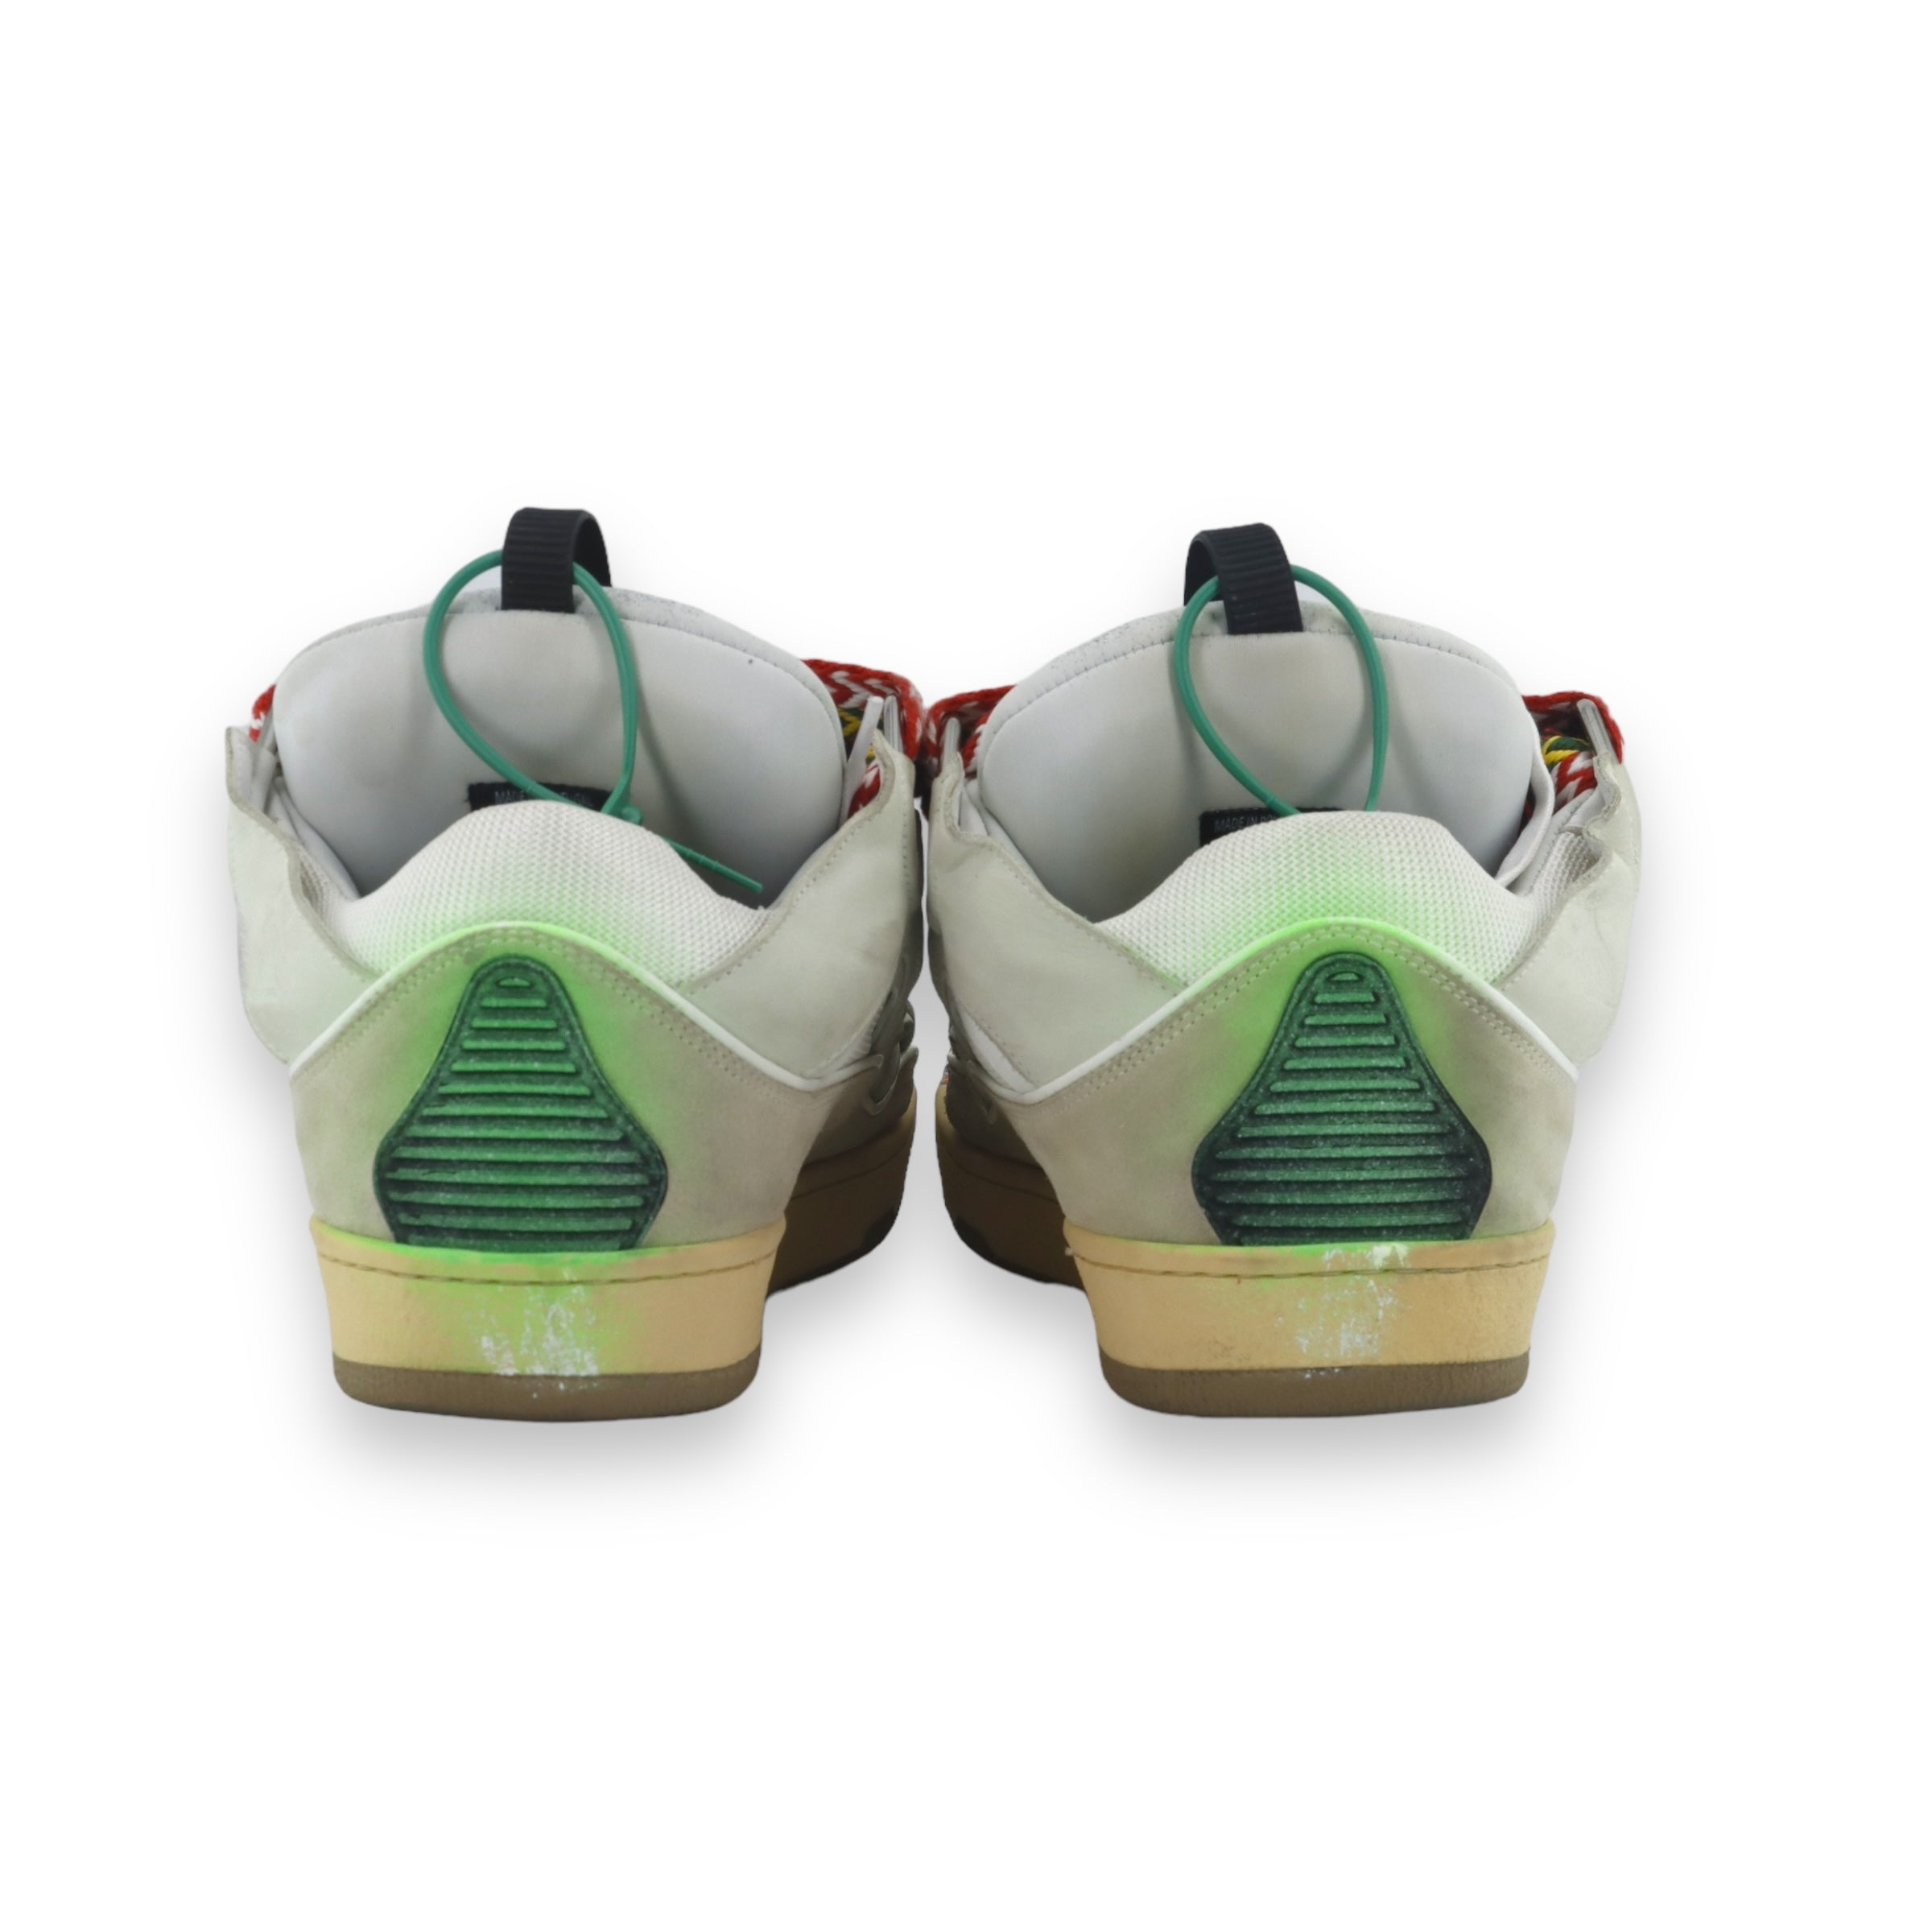 Gallery Dept. x Lanvin Painted Curb Sneakers